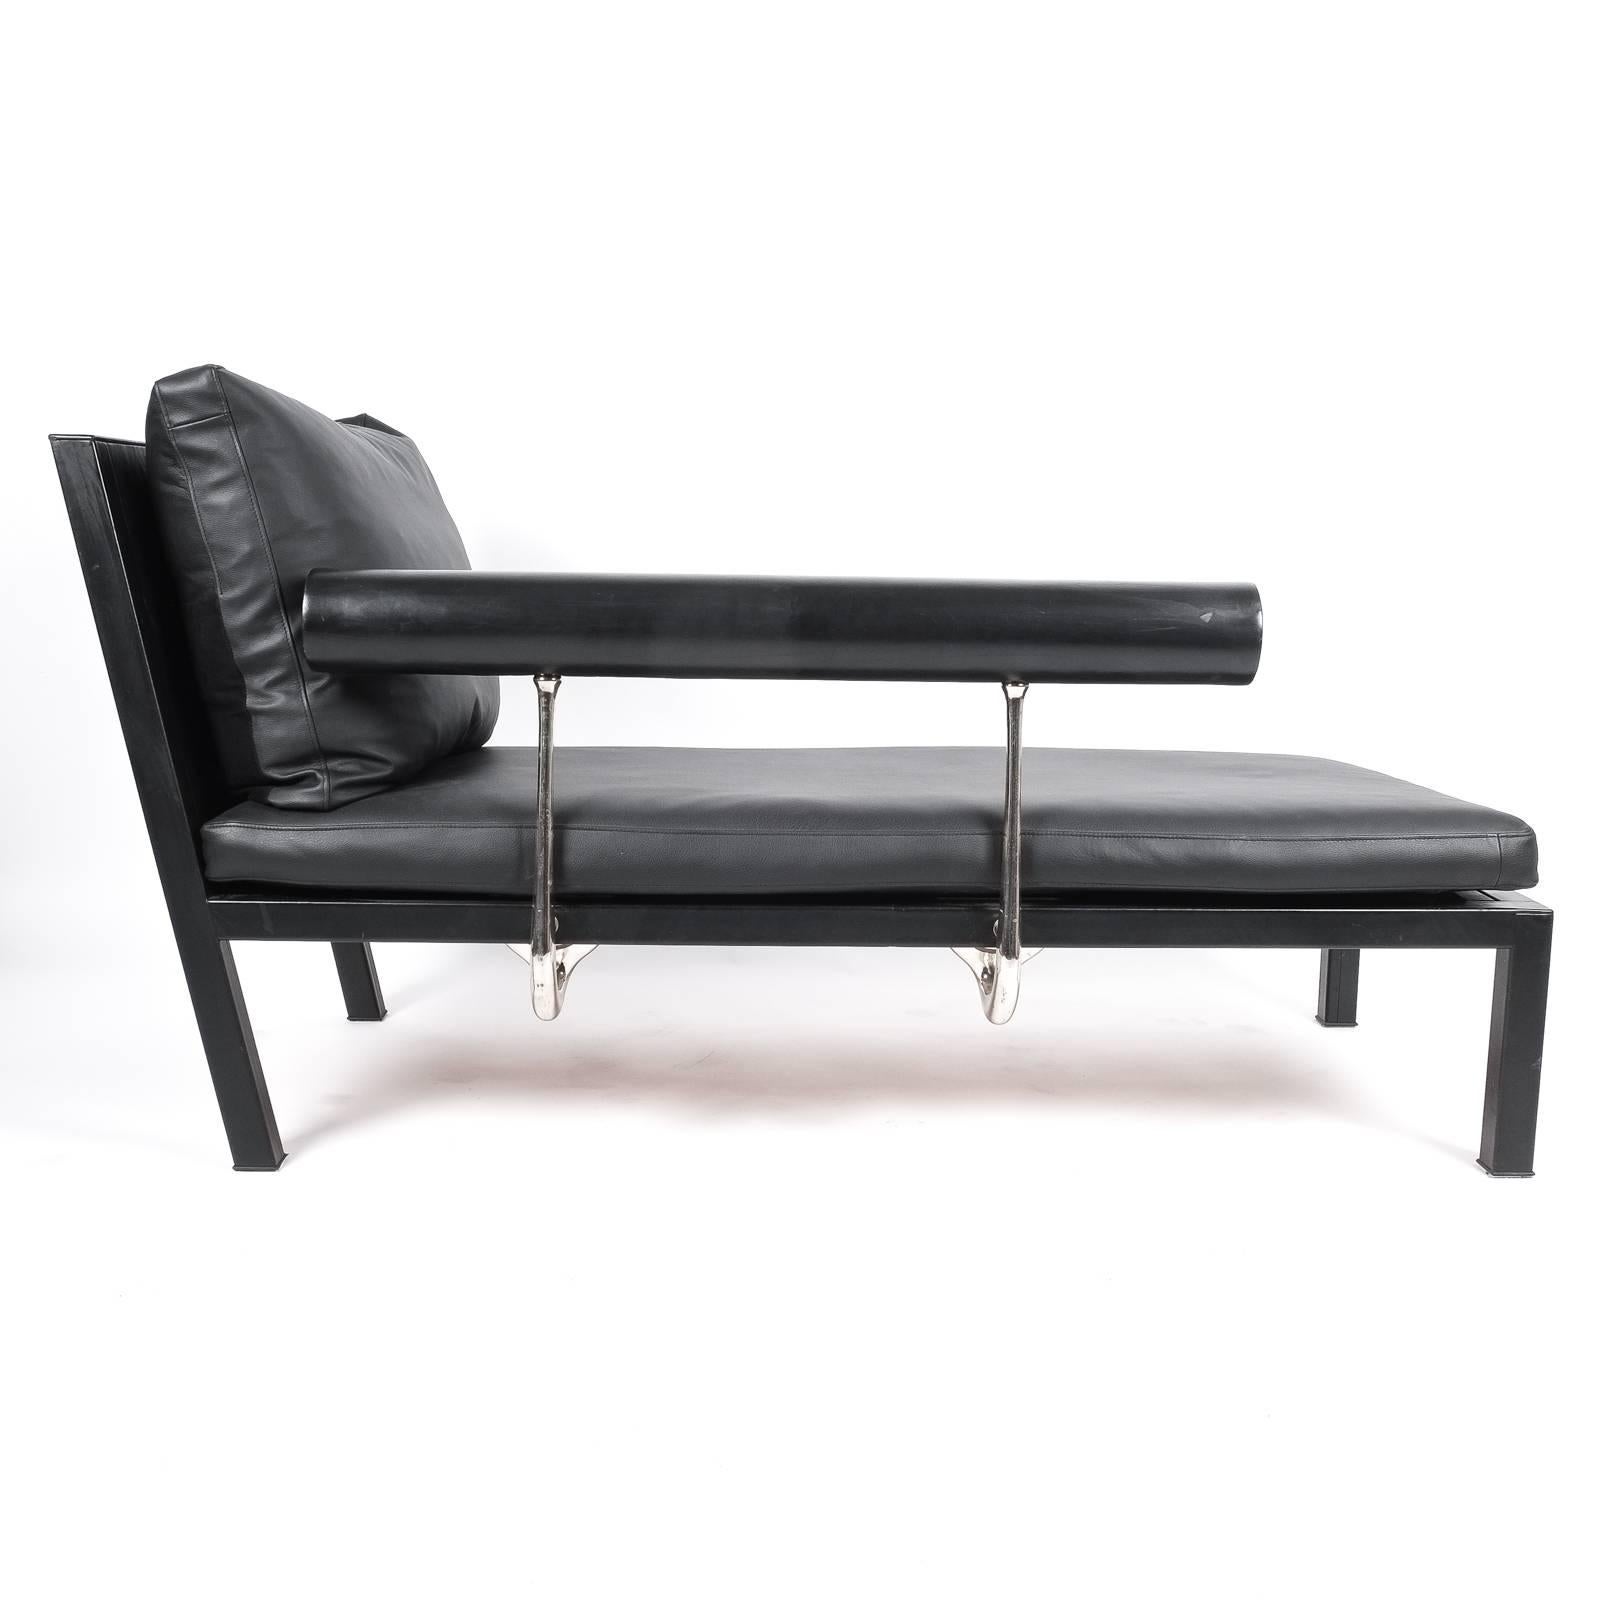 Leather Chaise Lounge Black Sofa Baisity by Antonio Citterio for B&B Italy, 1980 For Sale 6